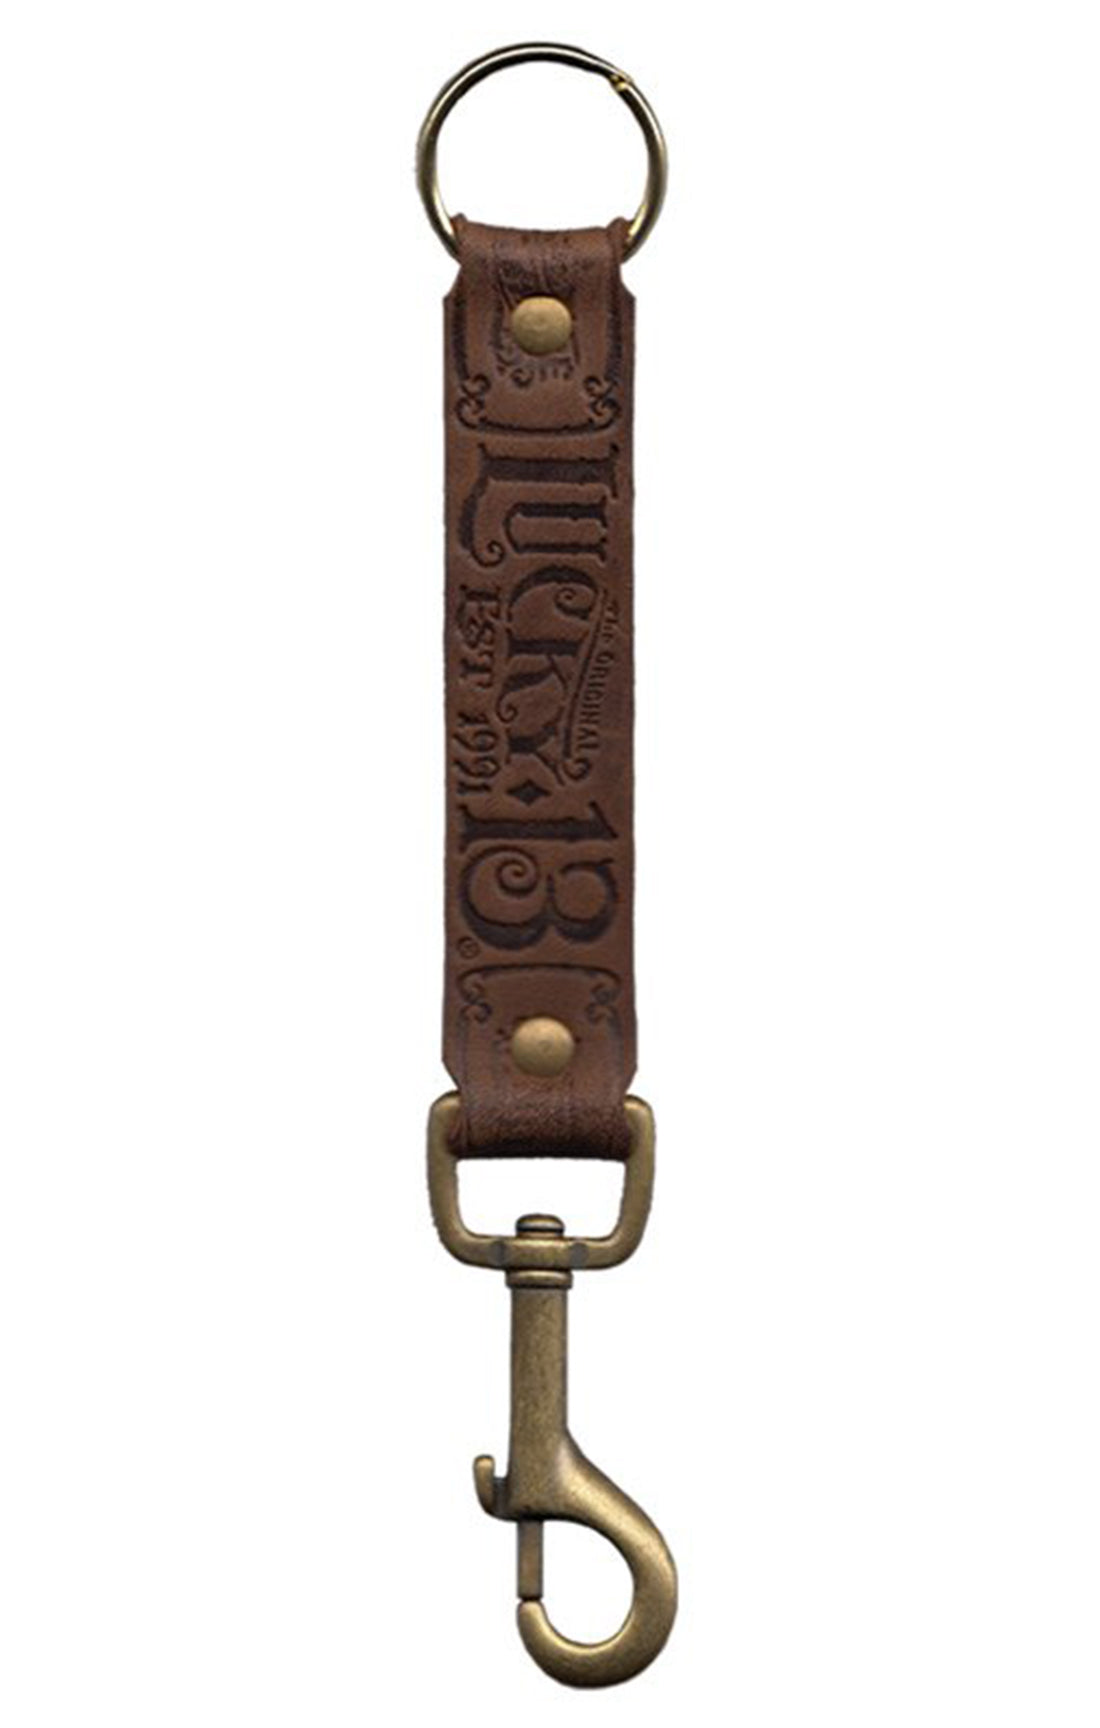 The MFG CO Leather Key Fob - ANTIQUED BROWN